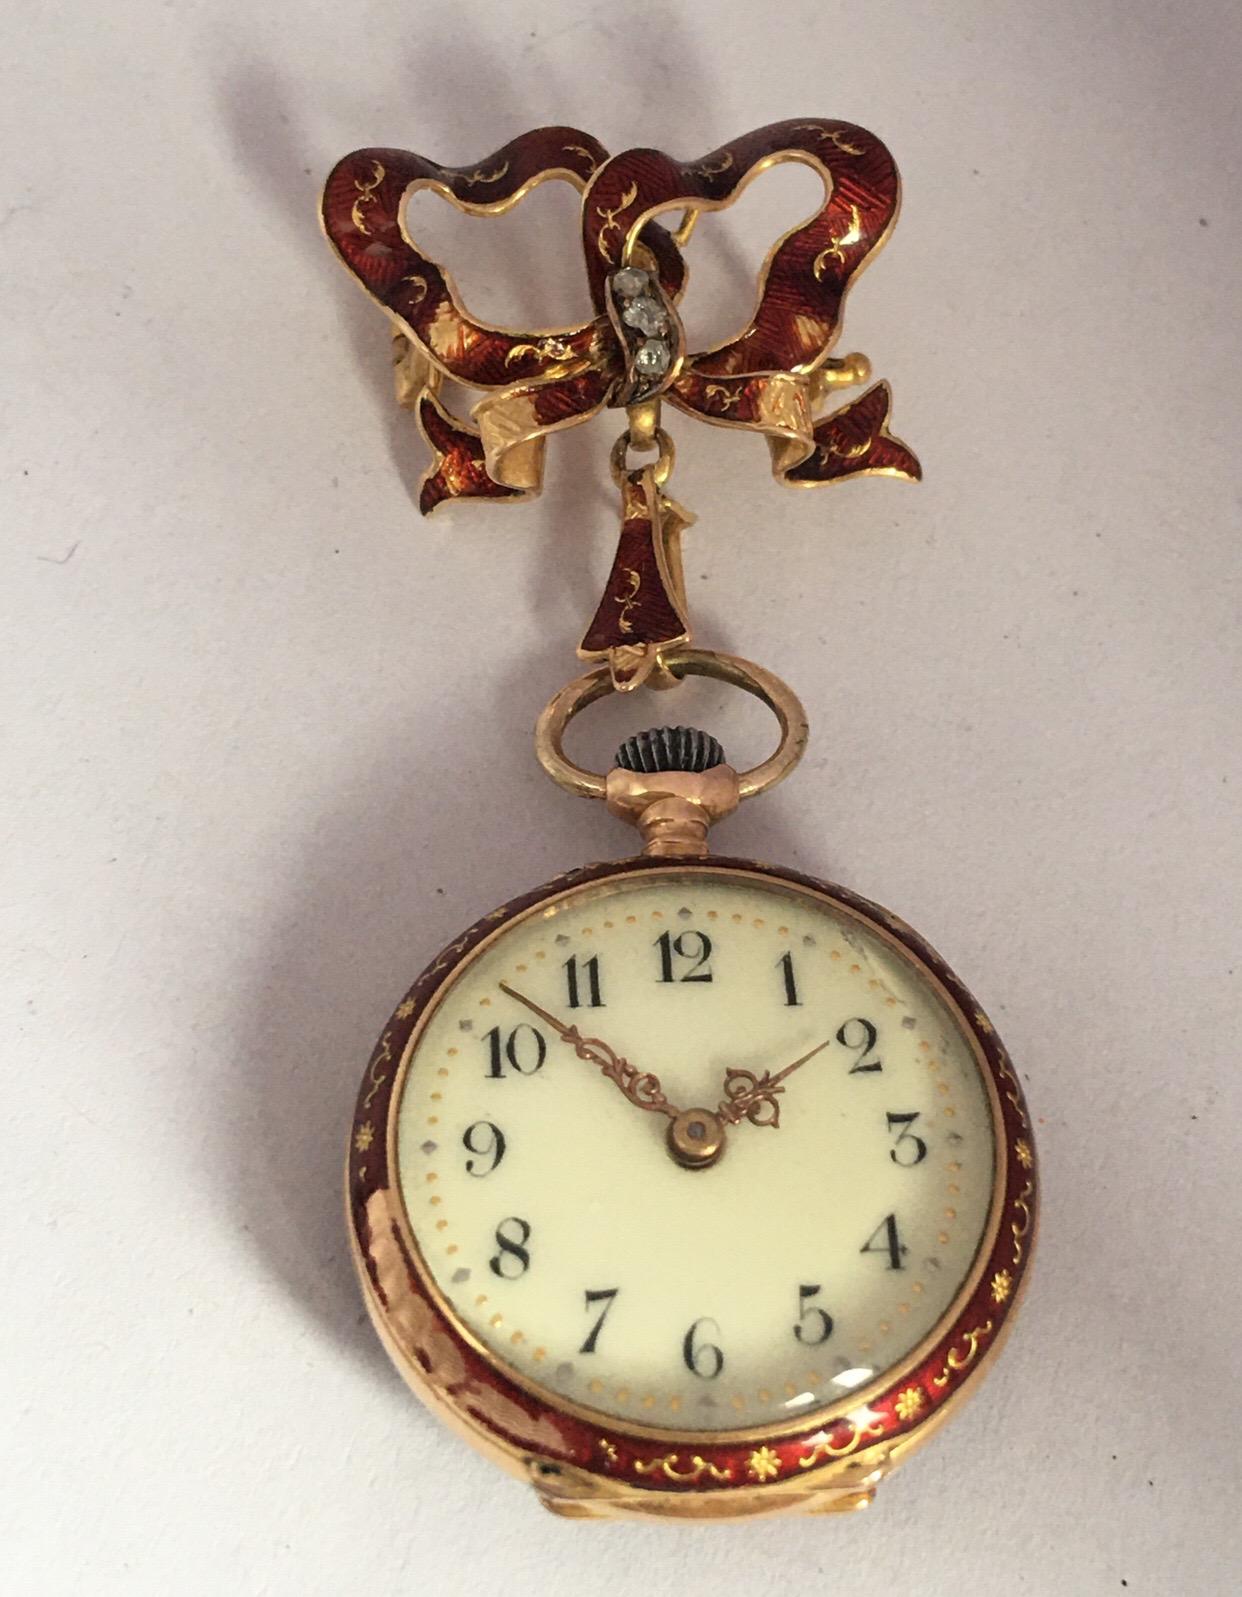 This beautiful antique 28mm diameter hand winding gold and diamond ladies brooch watch is in good working condition and it is running well. Visible signs of ageing and wear with light and small scratches on the enamel case and a tiny marks on the